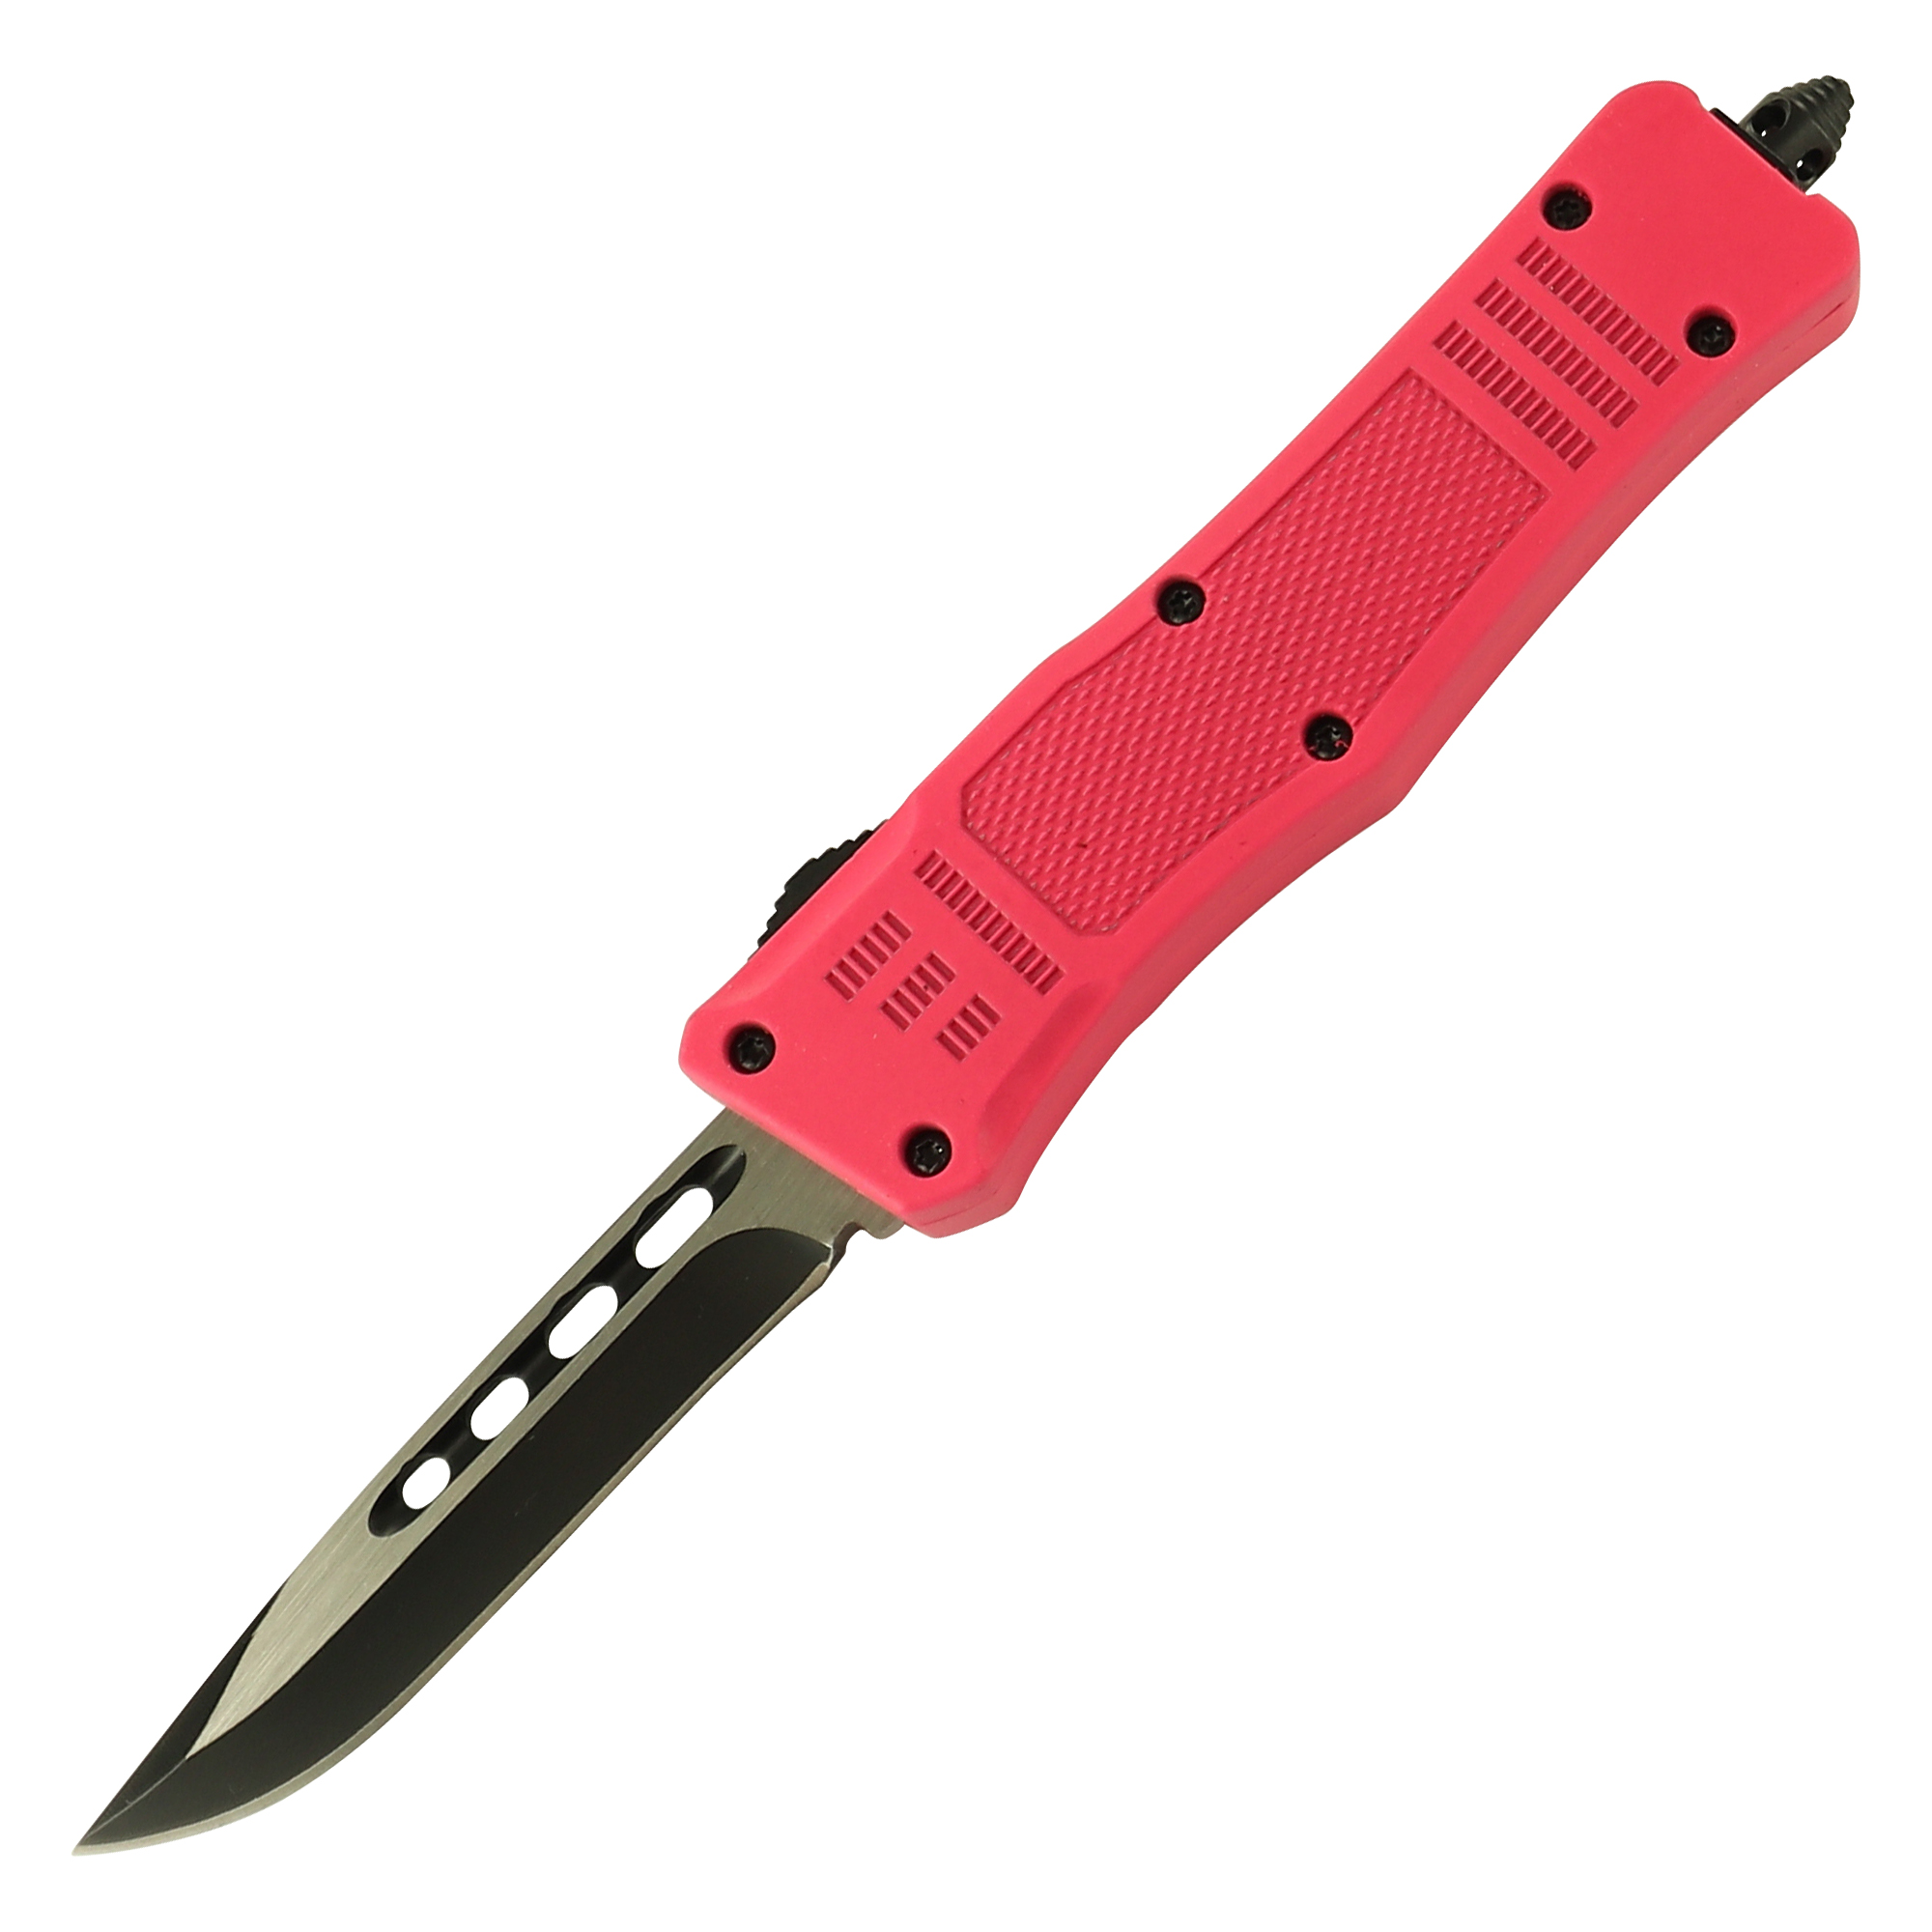 BARBIE?s Dream Knife Miniature Automatic Out the Front Knife